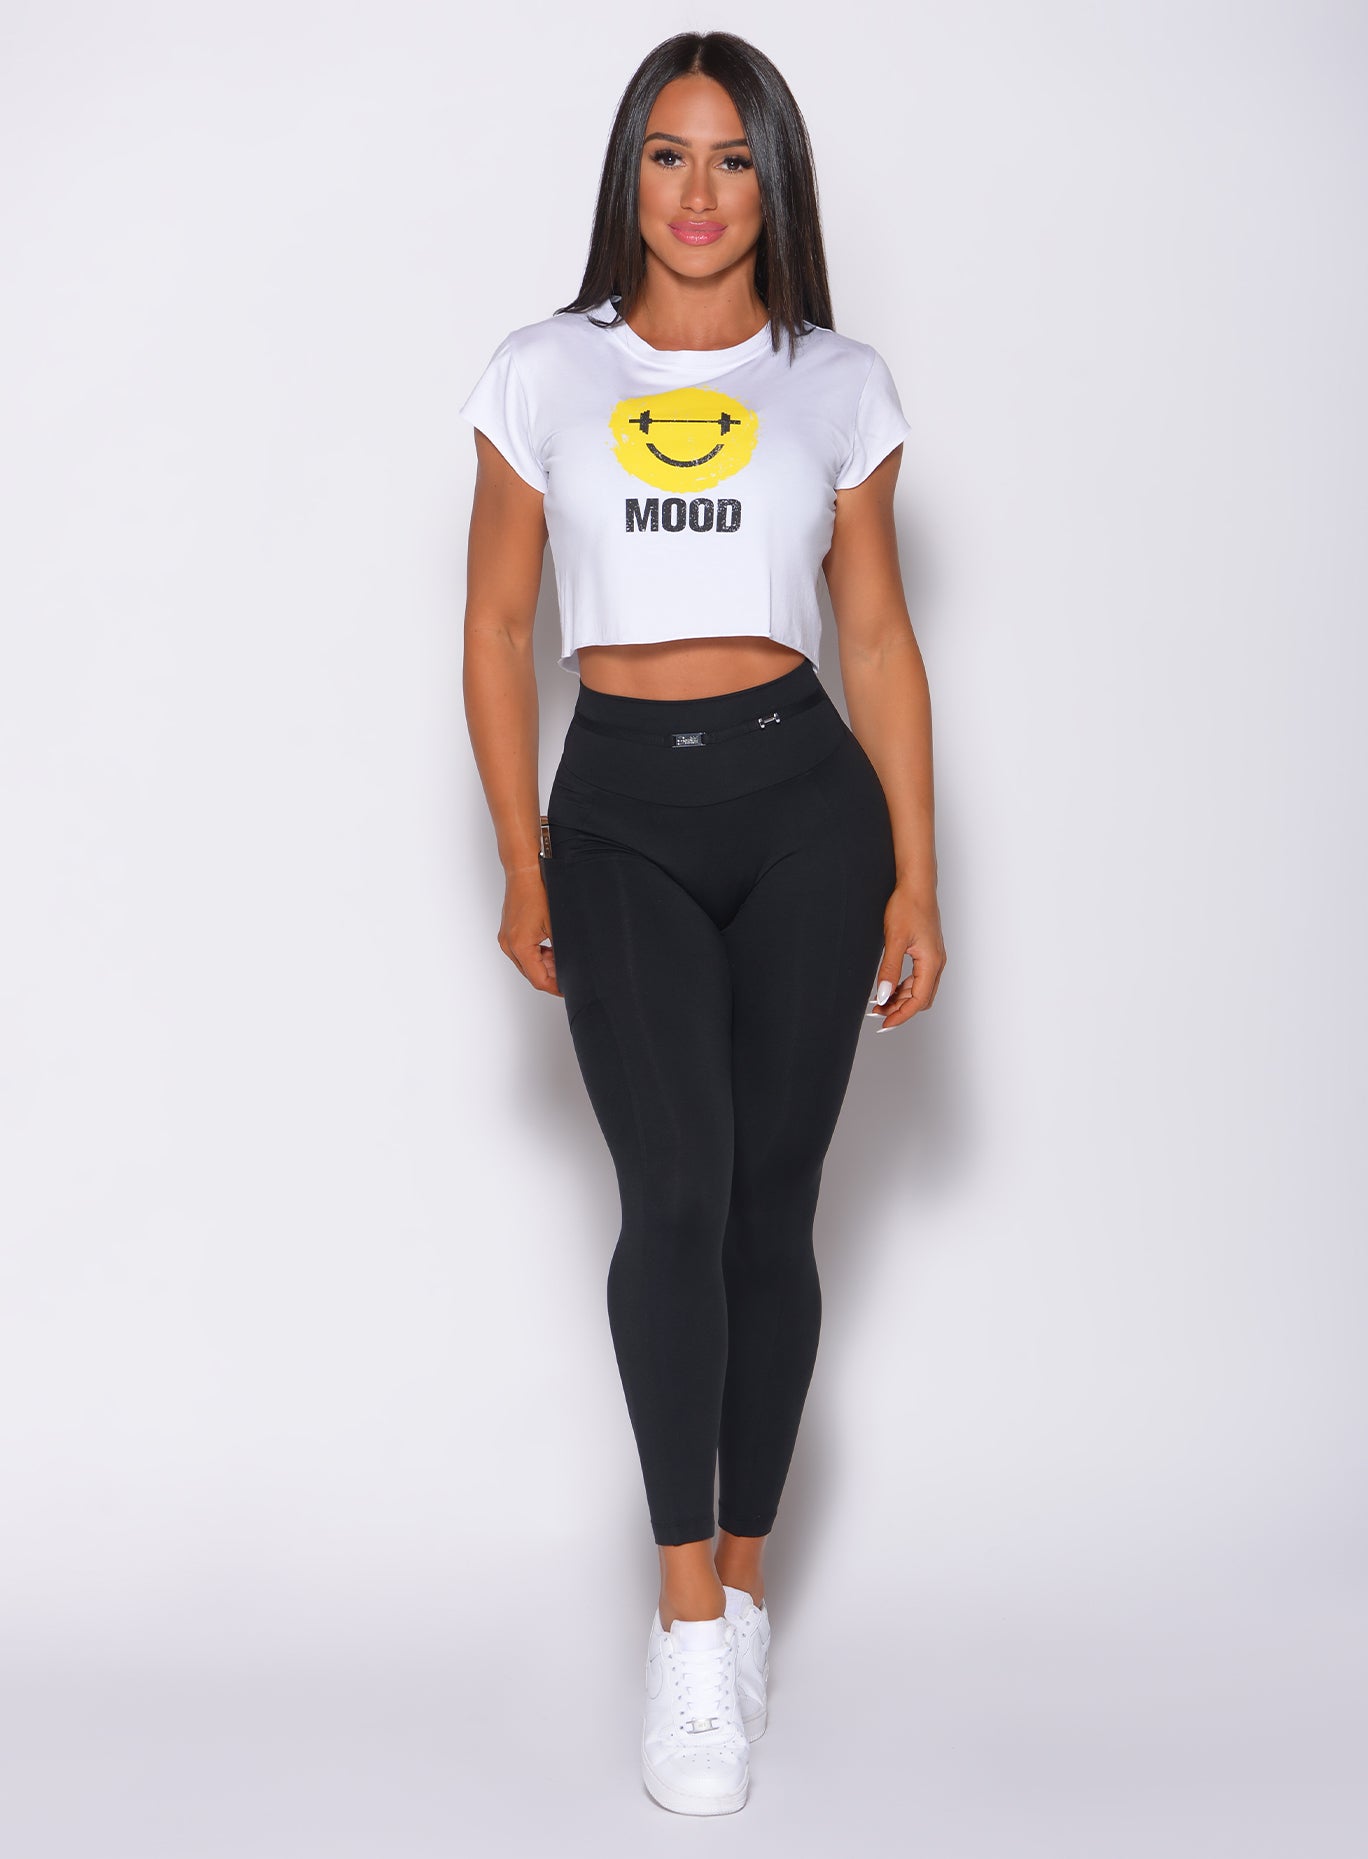 Model facing forward wearing our white mood tee and a high waisted black leggings 